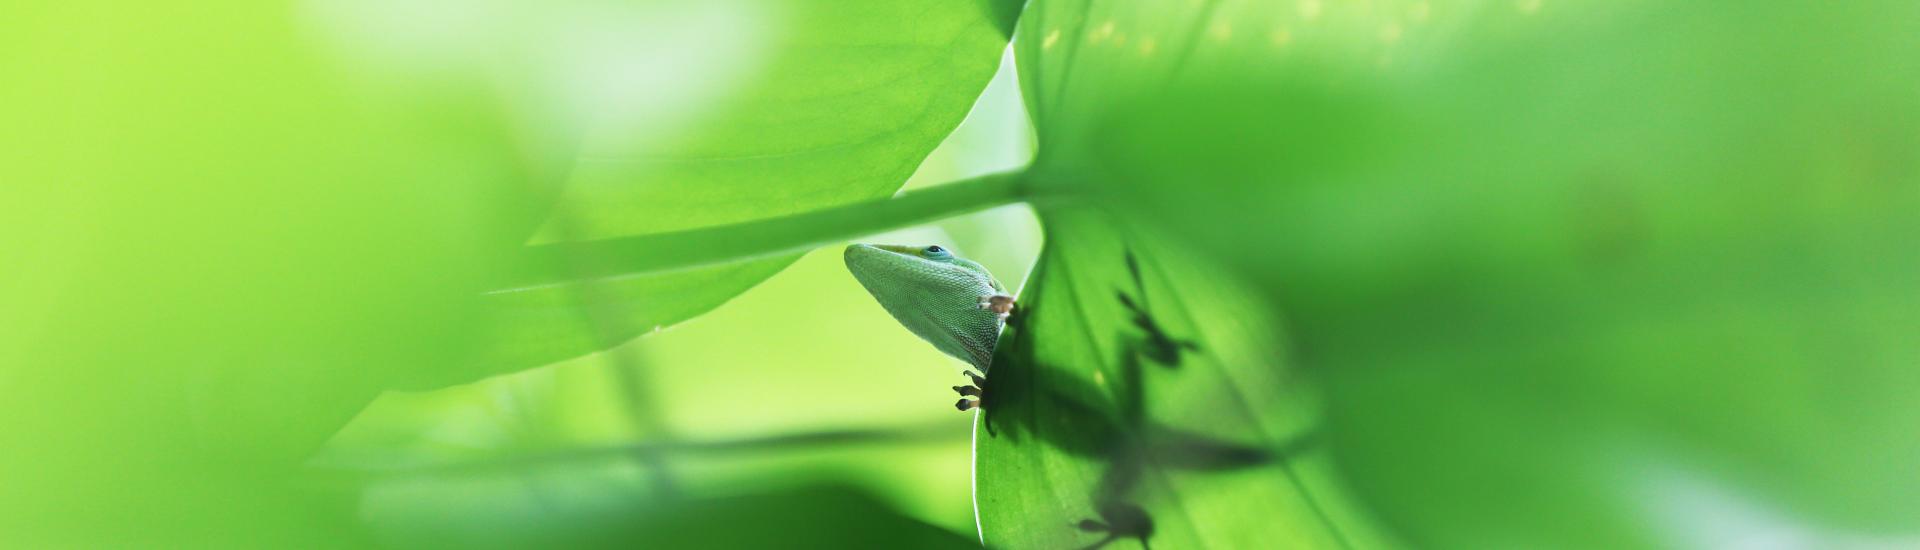 A view looking up of some leaves with a green anole sitting on the leaves